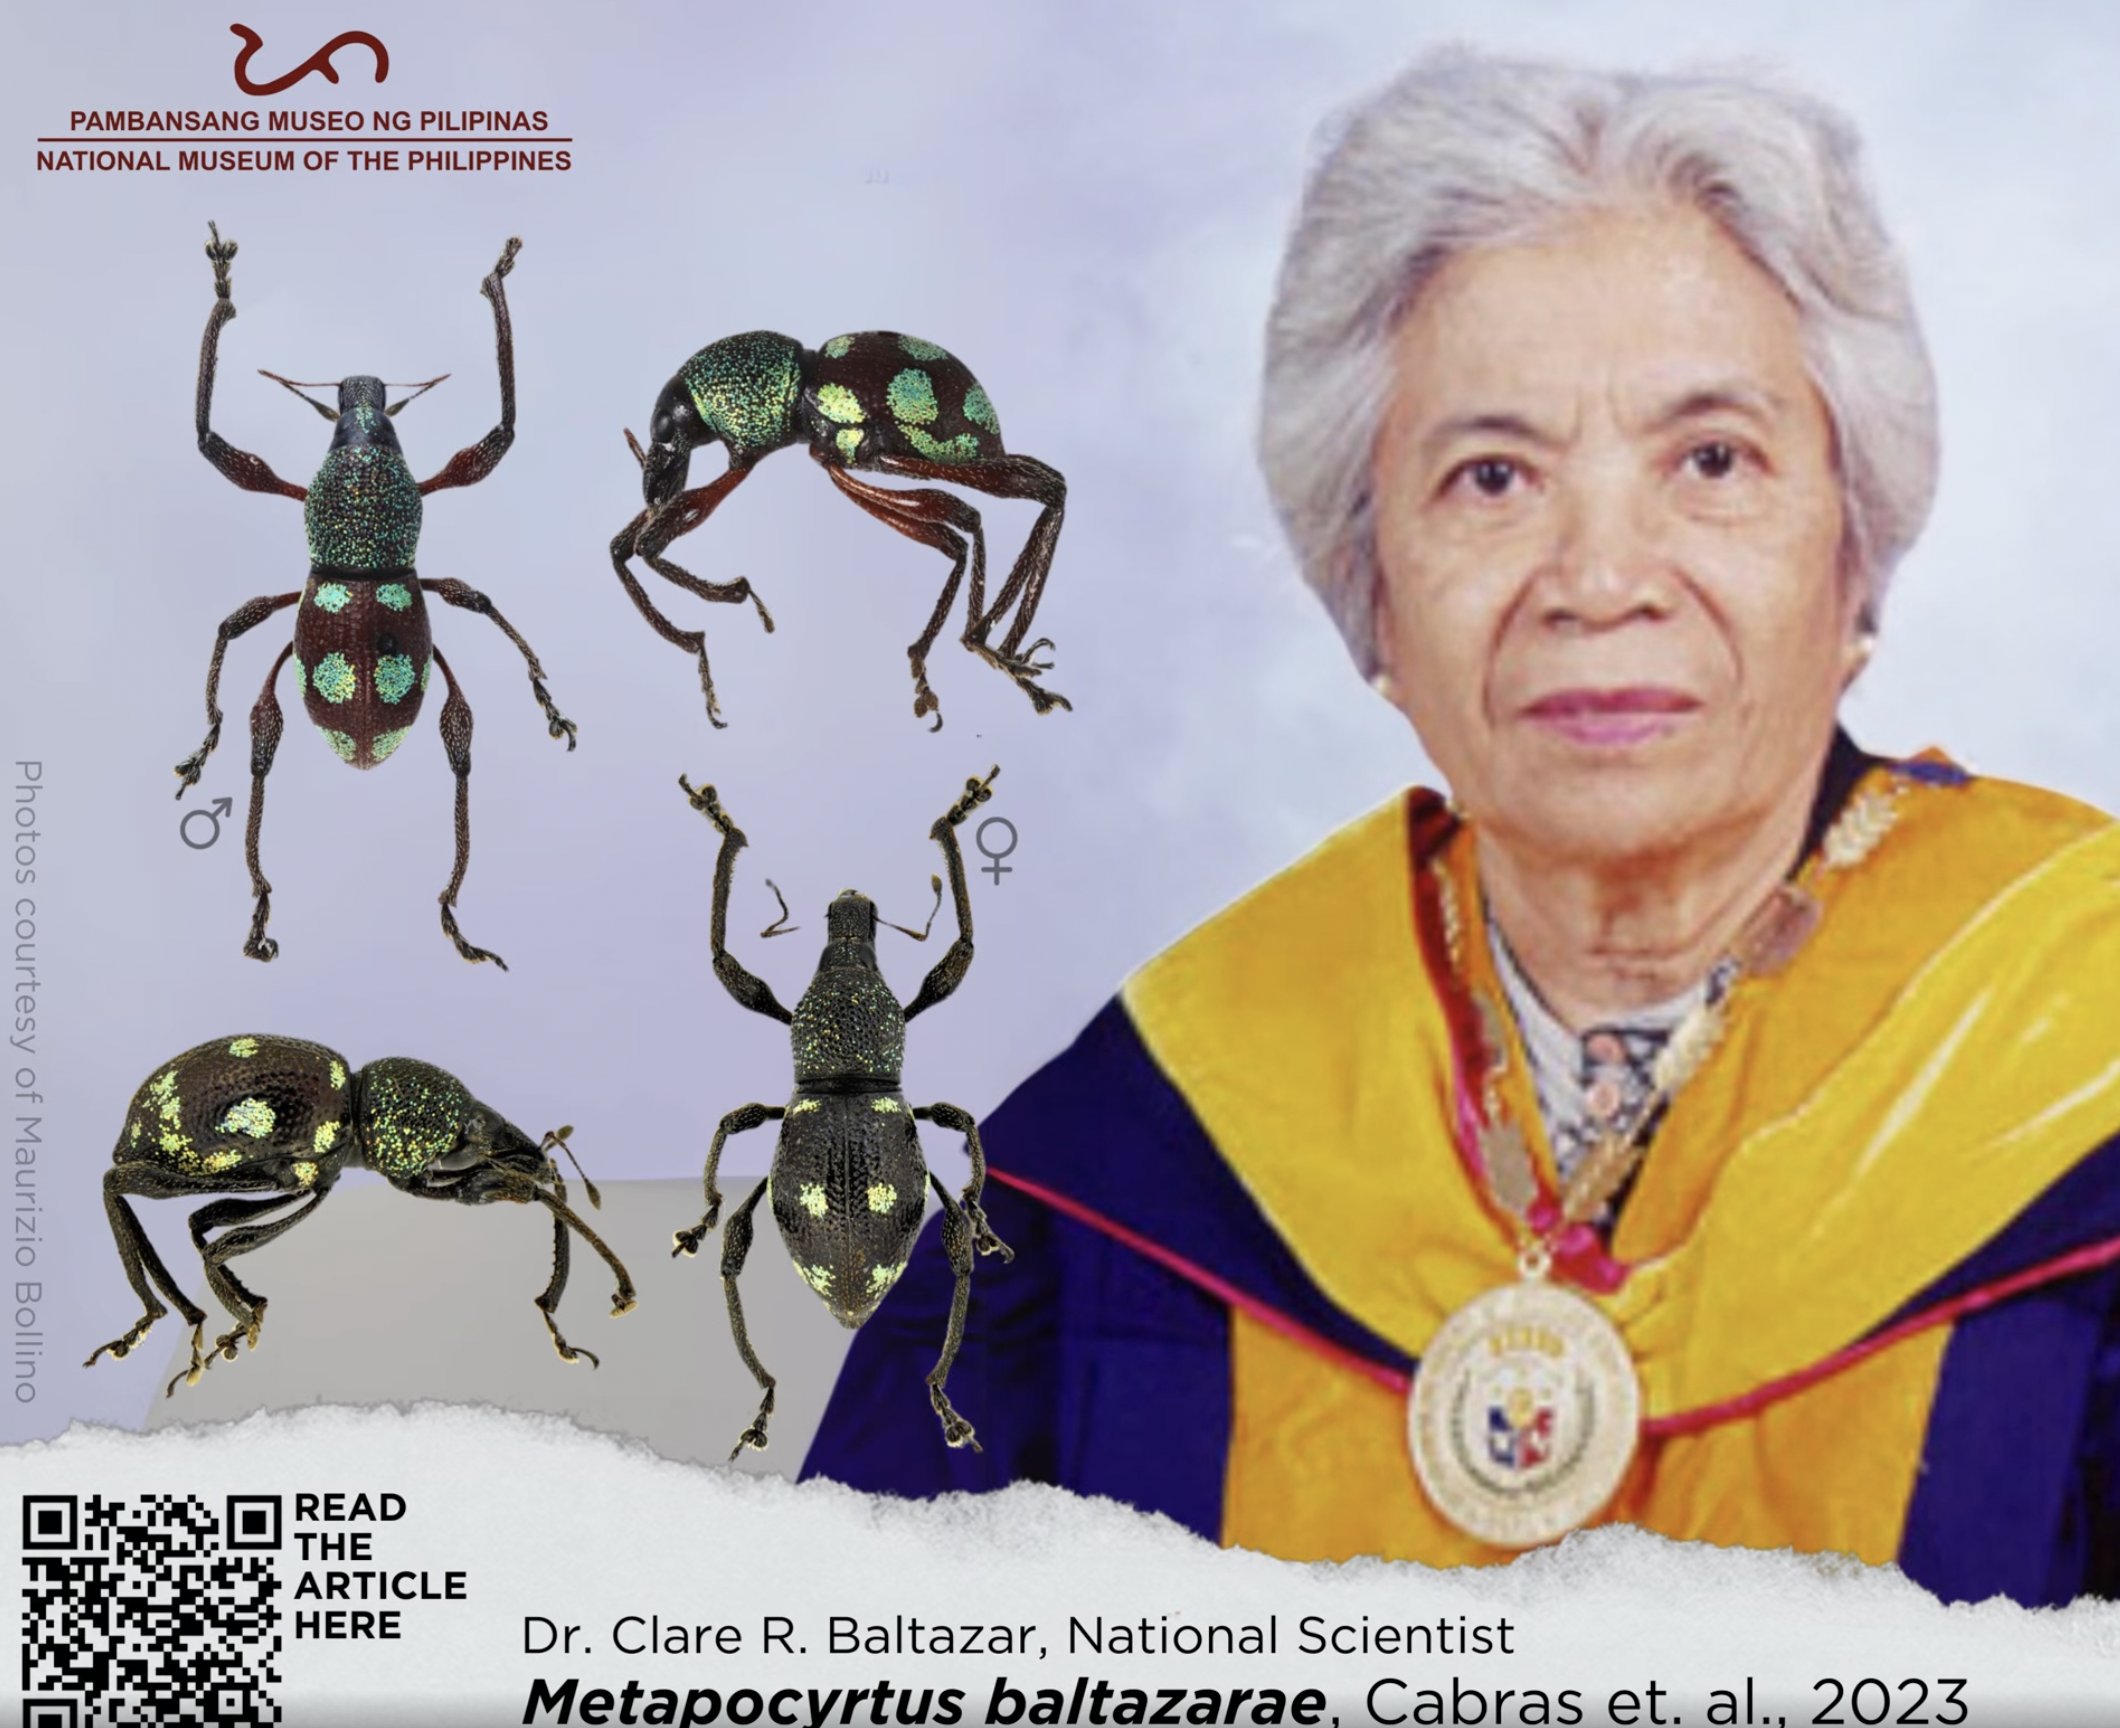 Researchers have conducted studies on a new species of beetle found in the Philippines more than three decades after its initial discovery.